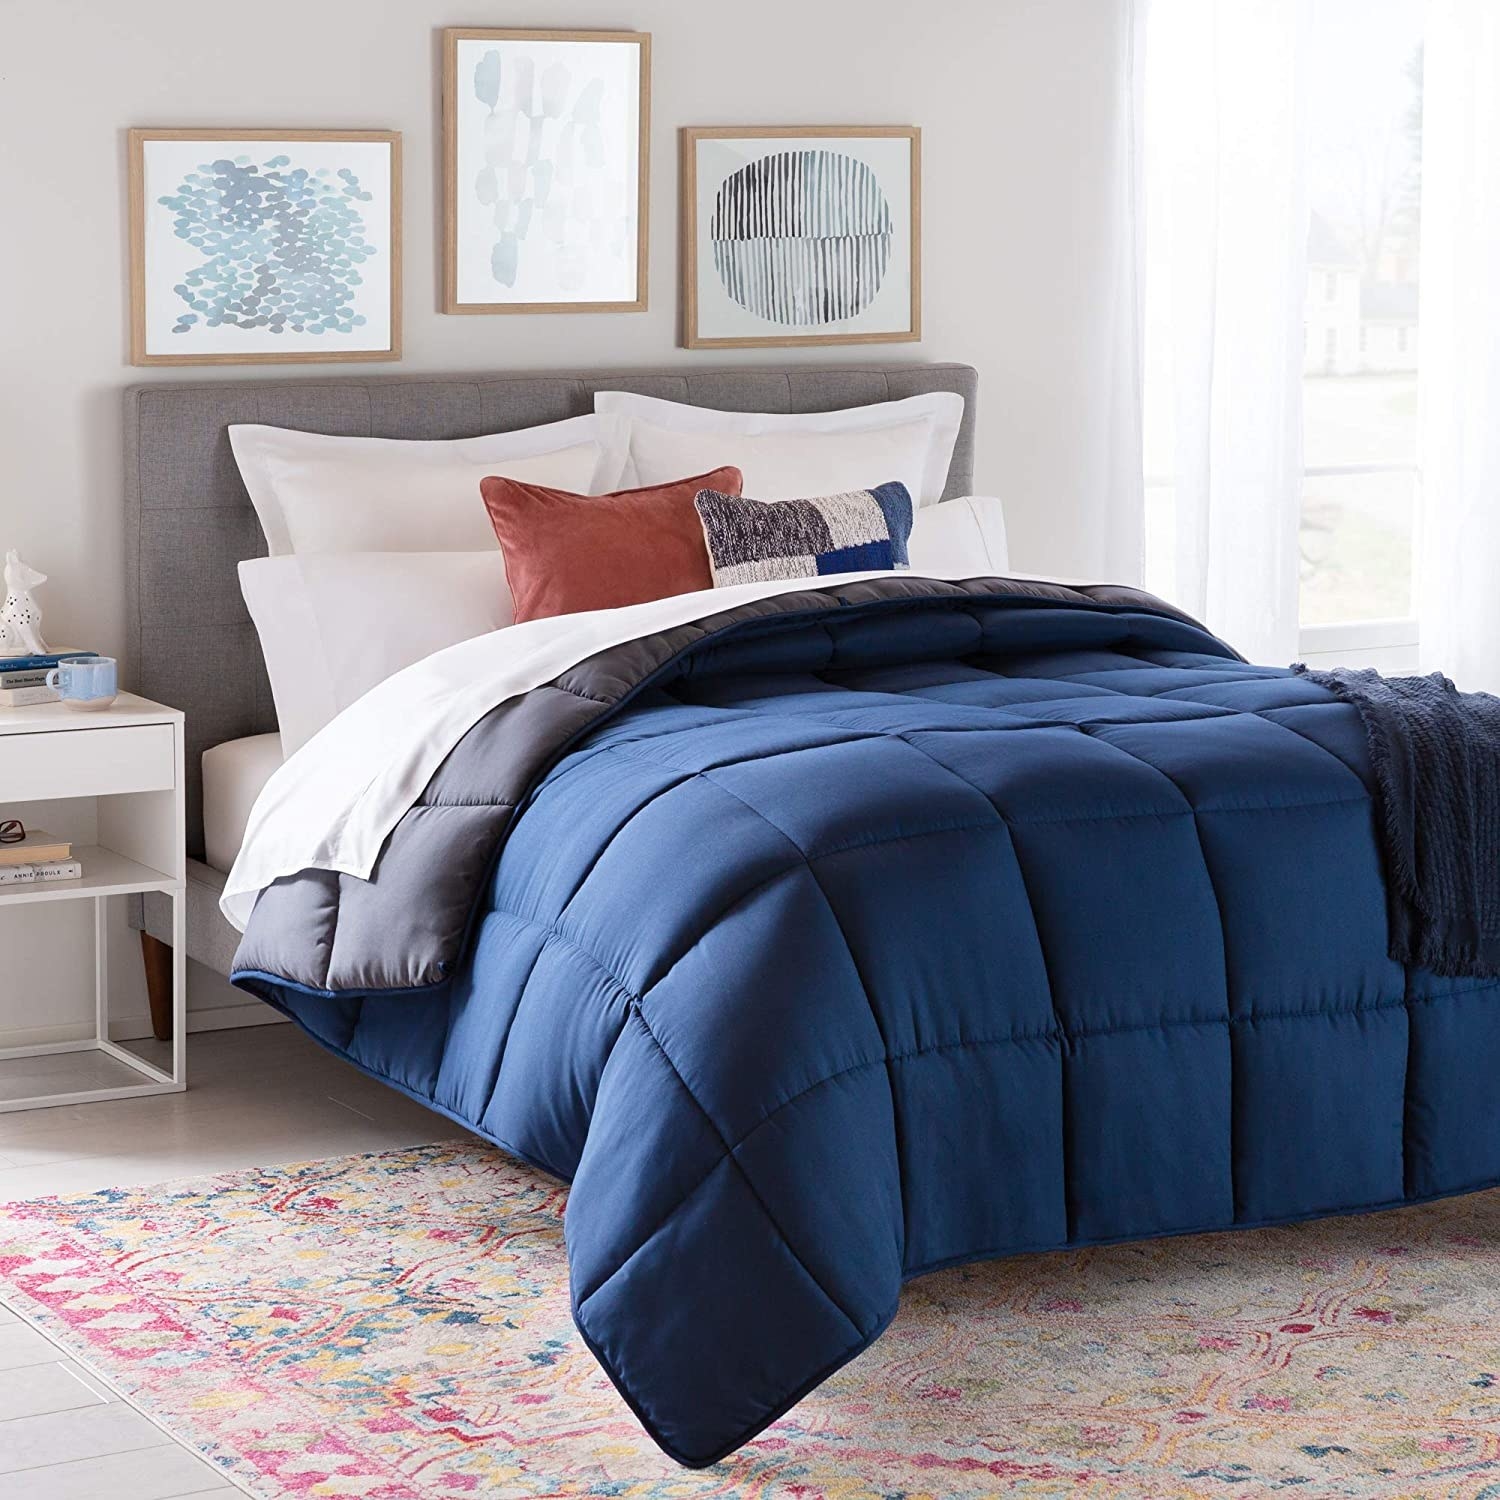 a comforter on a cozy bed in a stylish room